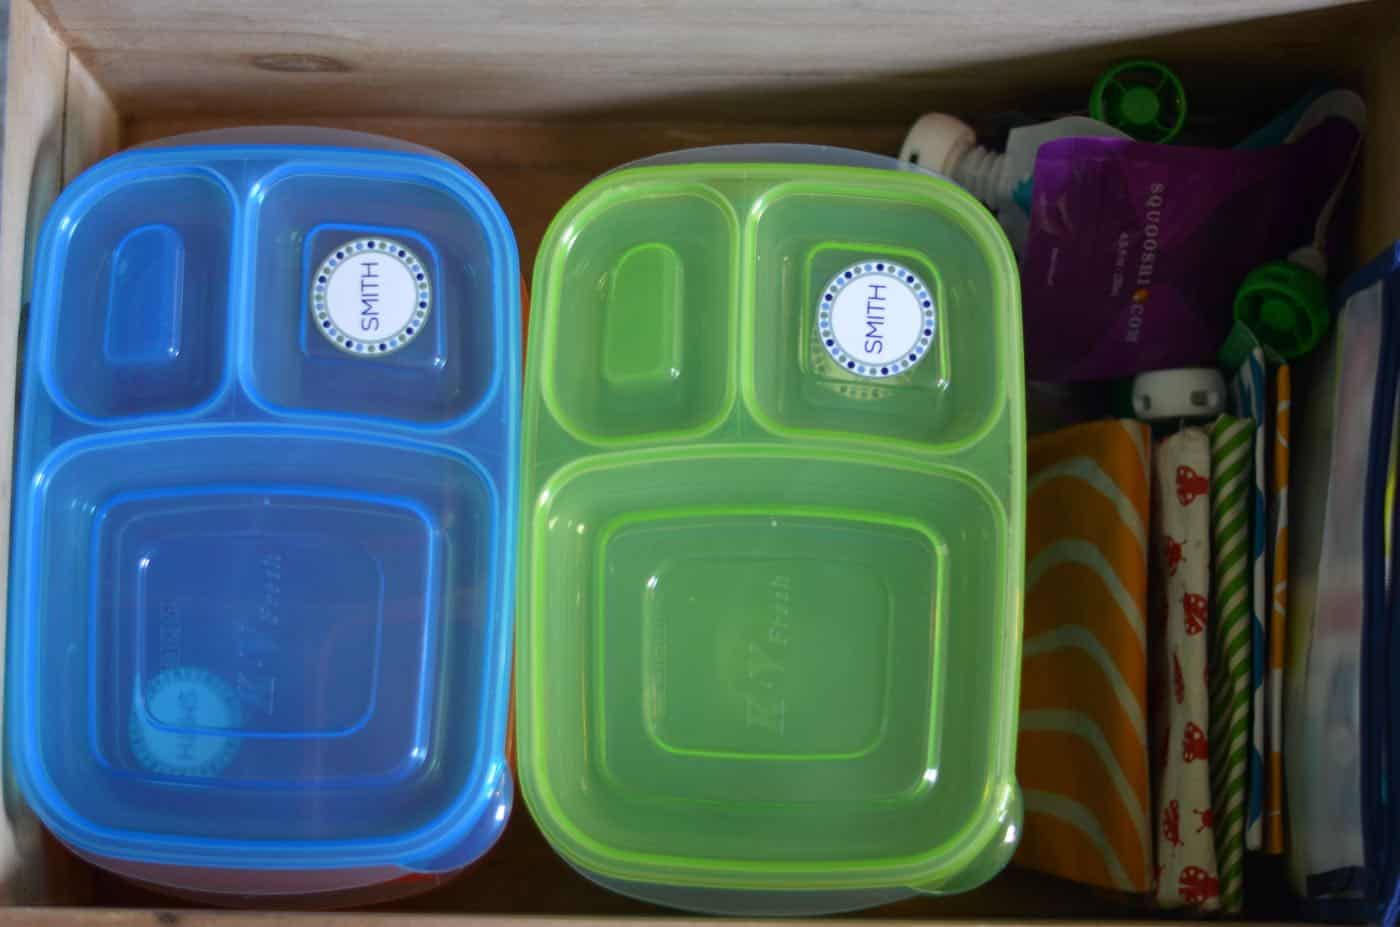 Self serve lunch stations for the children so they can pack their own lunch.